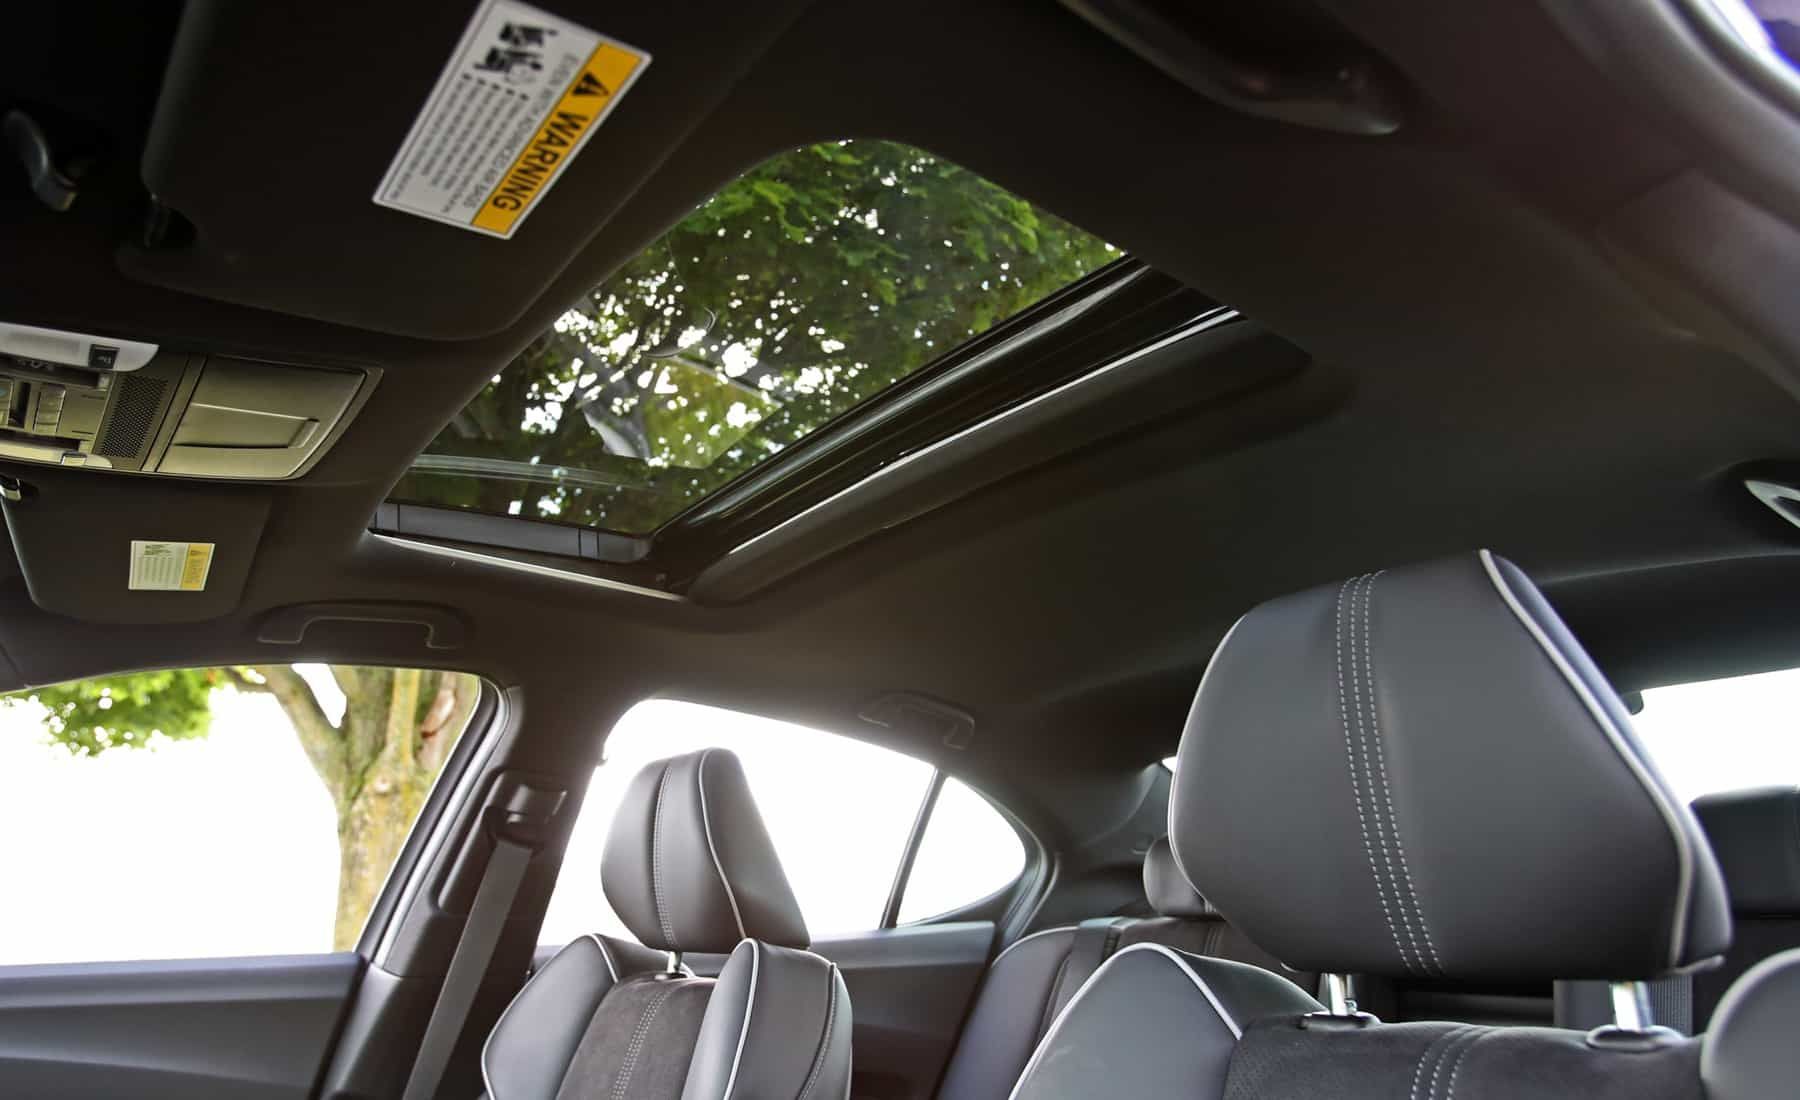 2018 Acura TLX Interior Seats Panoramic Sunroof (View 25 of 46)